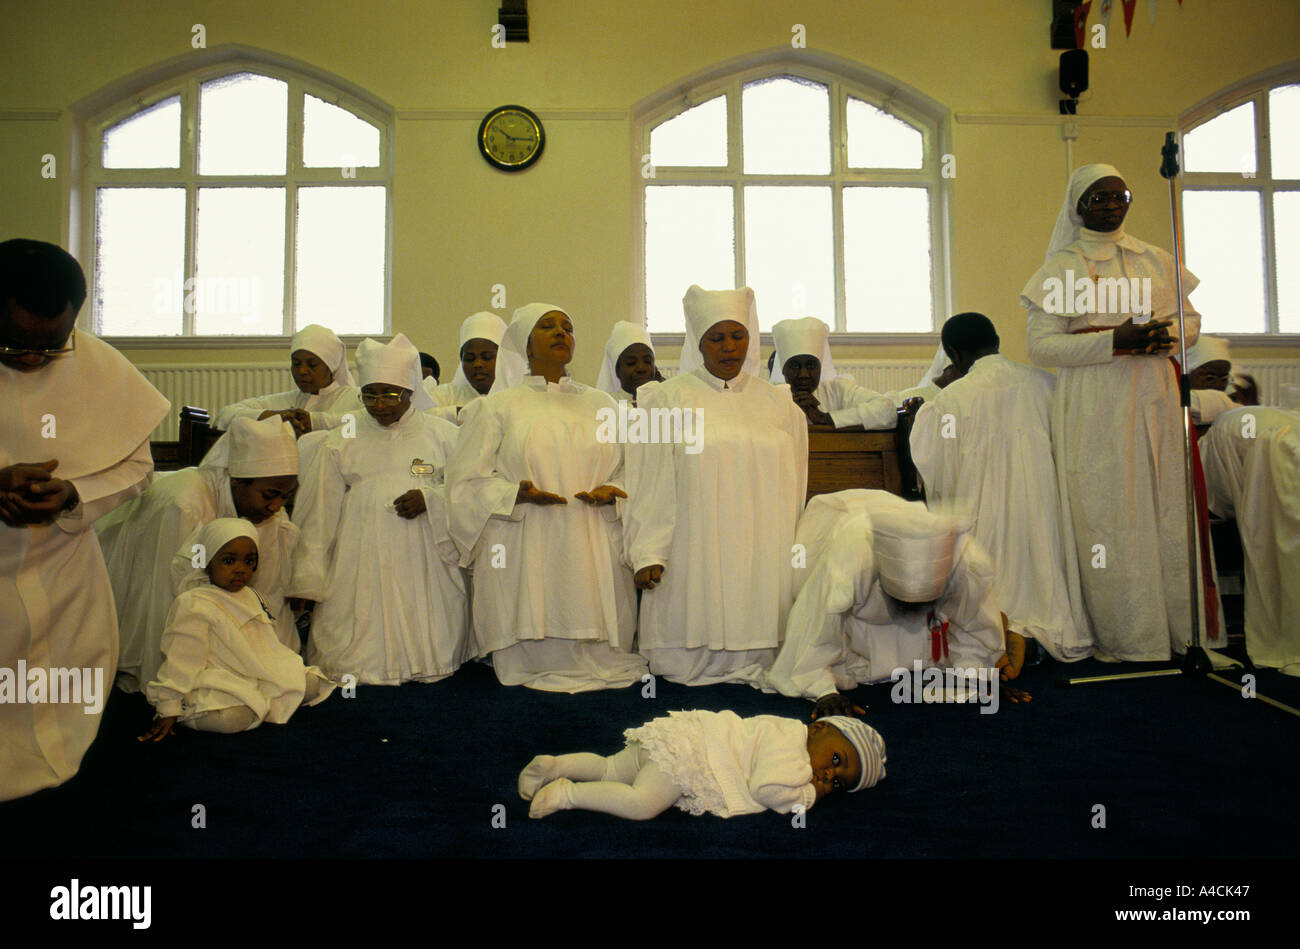 CHILDREN OF MEMBERS OF THE 'CHURCH OF THE CROSS AND STAR' AN EVANGELICAL CHRISTIAN SECT, WEARING WHITE ROBES Stock Photo